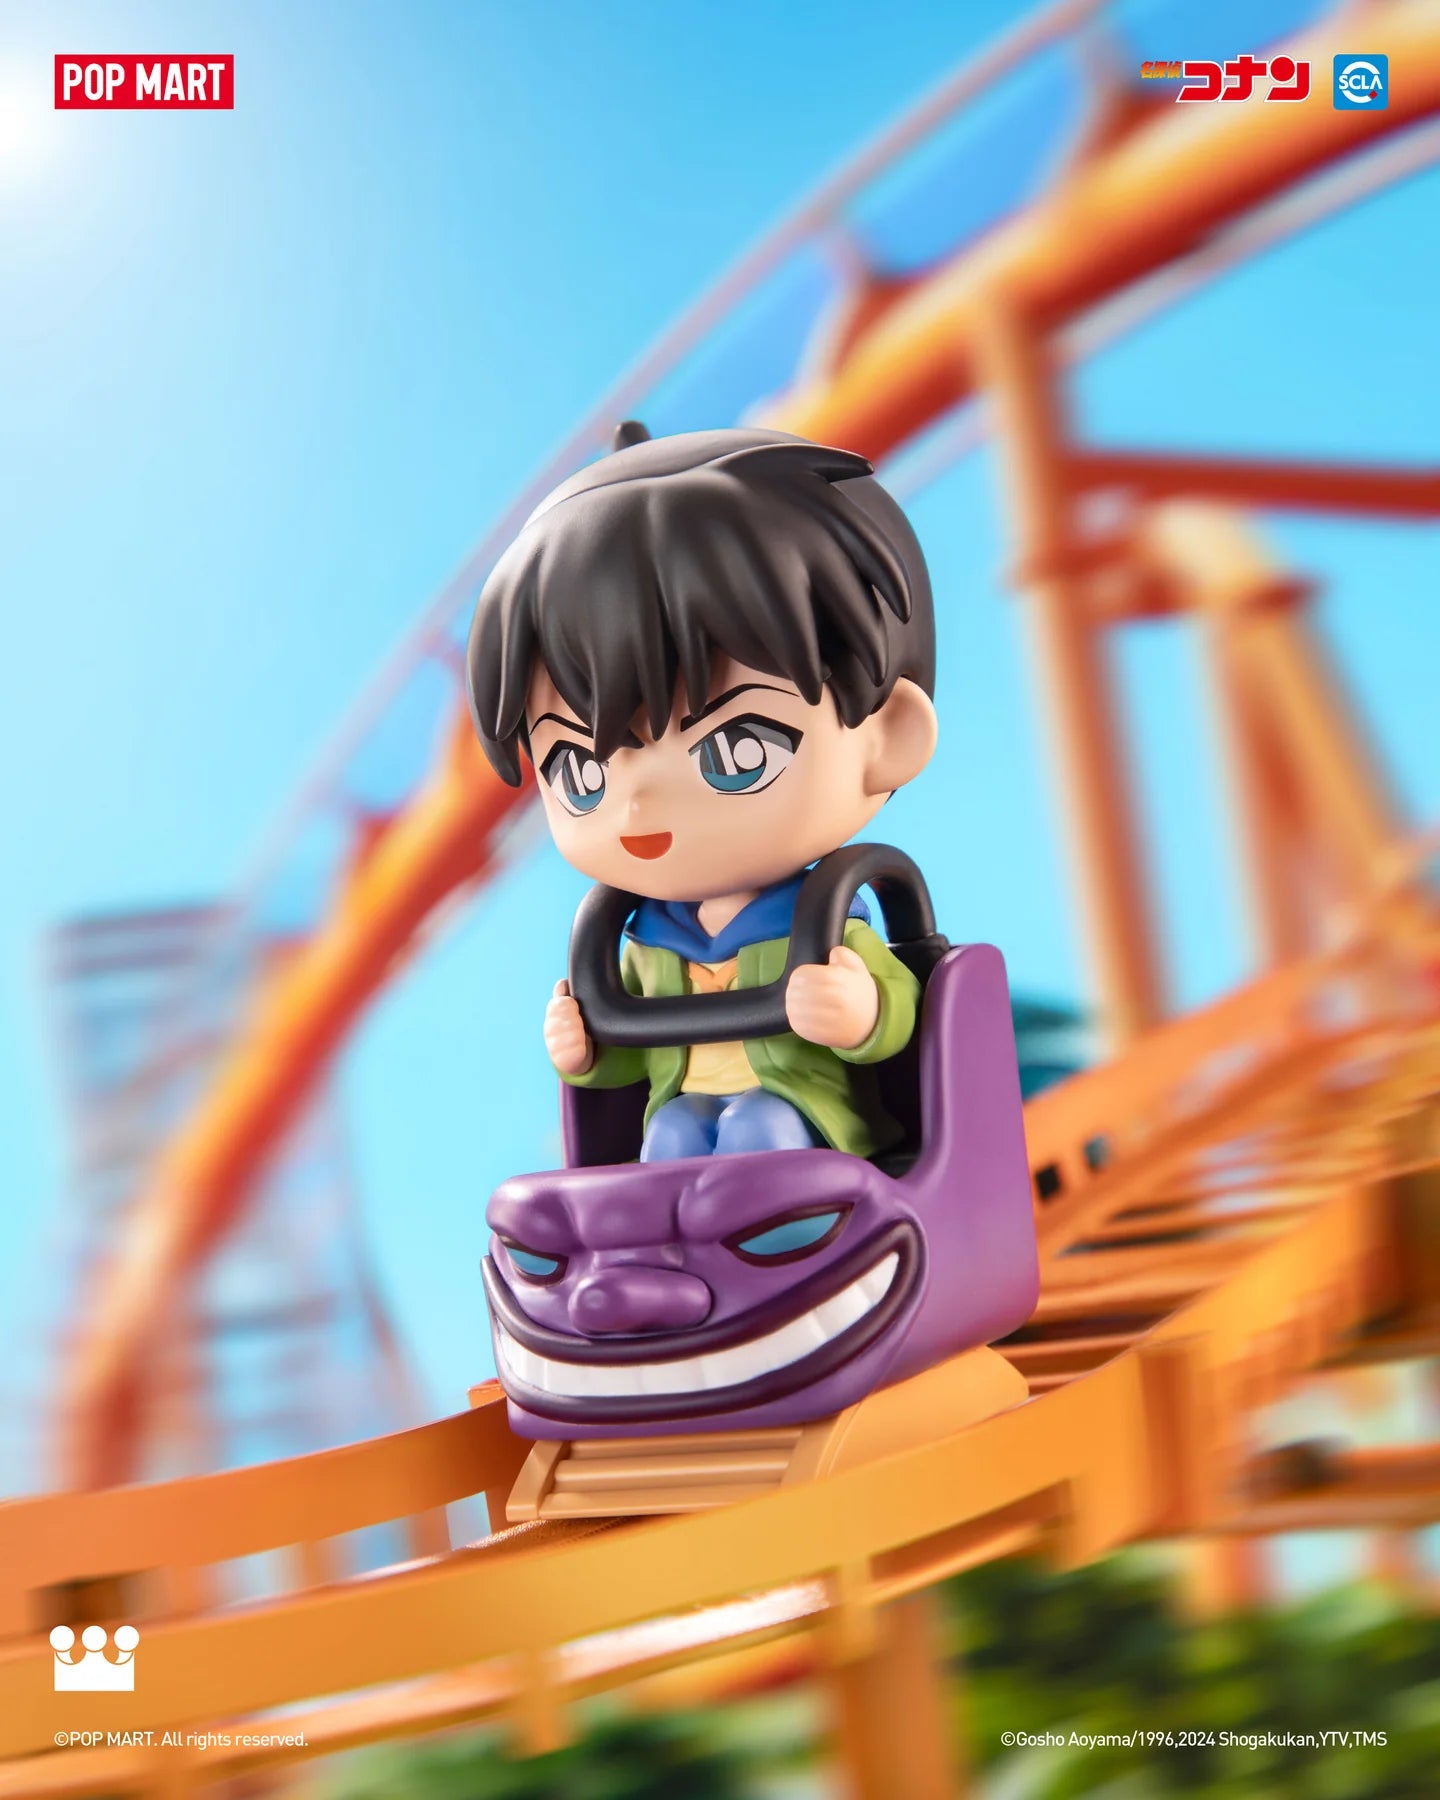 Detective Conan Carnival Blind Box Series: Toy figurine on roller coaster, cartoon character toy car, and more.